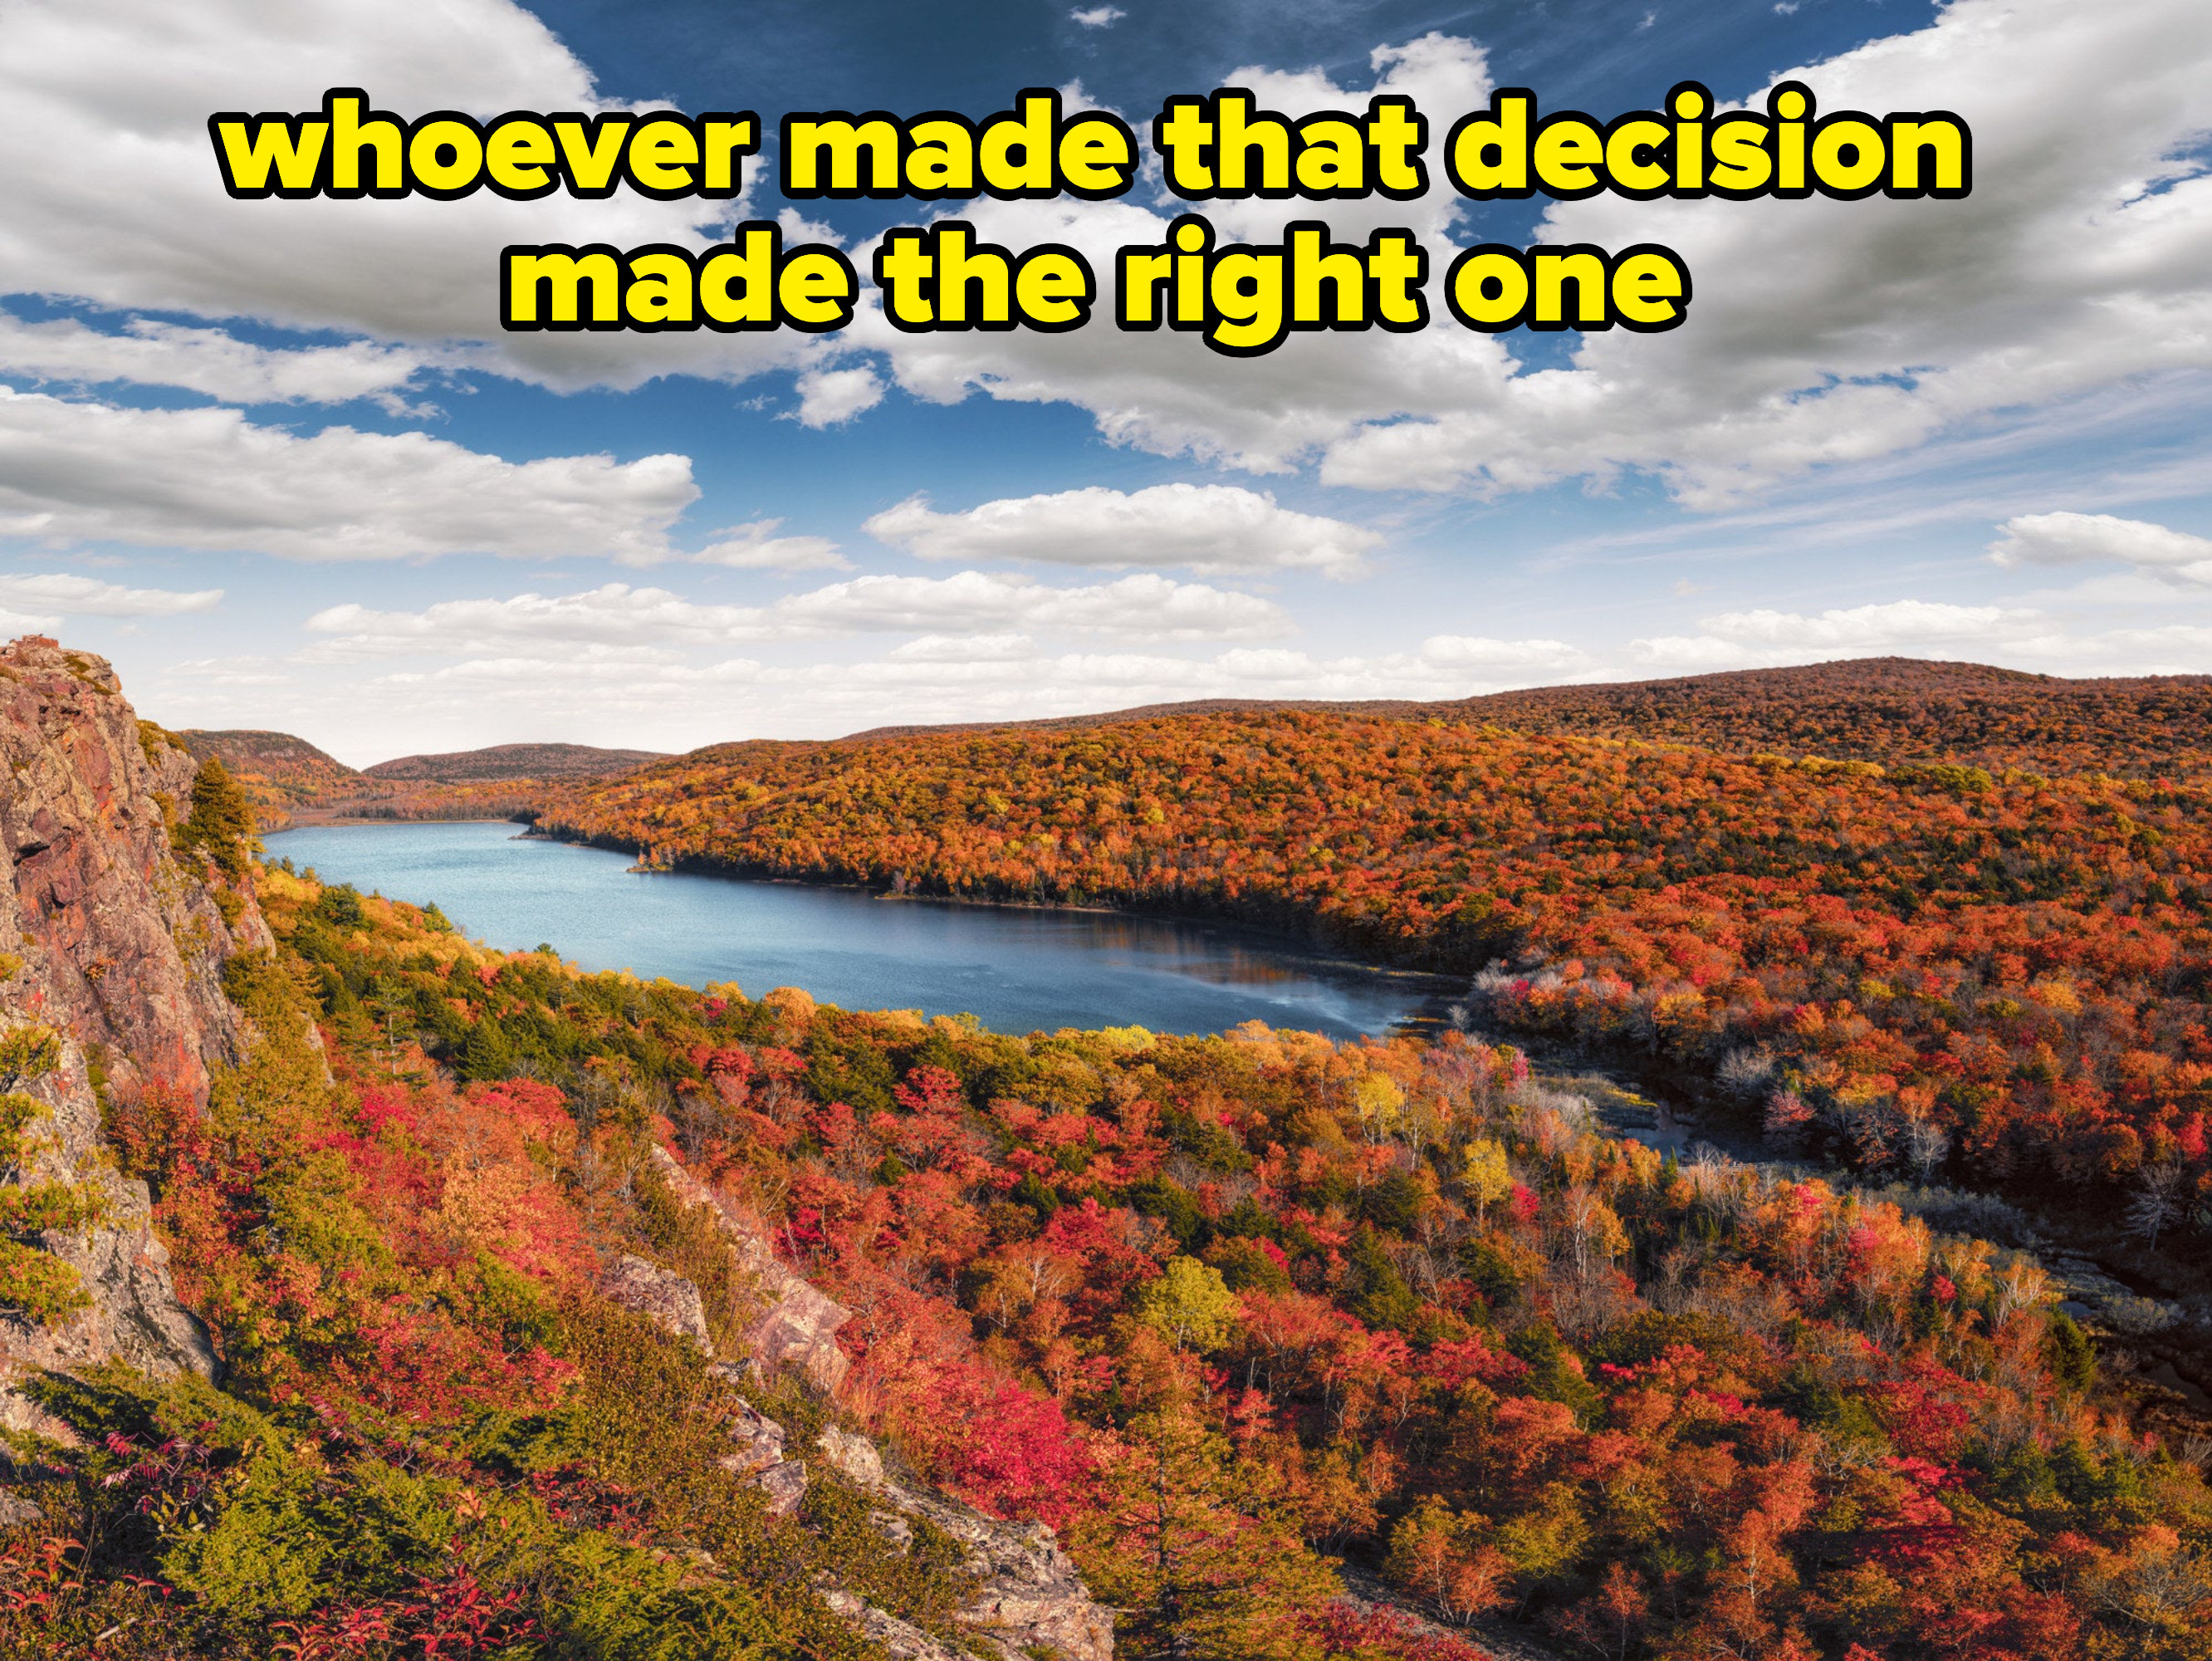 a bunch of fall foliage around a river, with caption: whoever made that decision made the right one